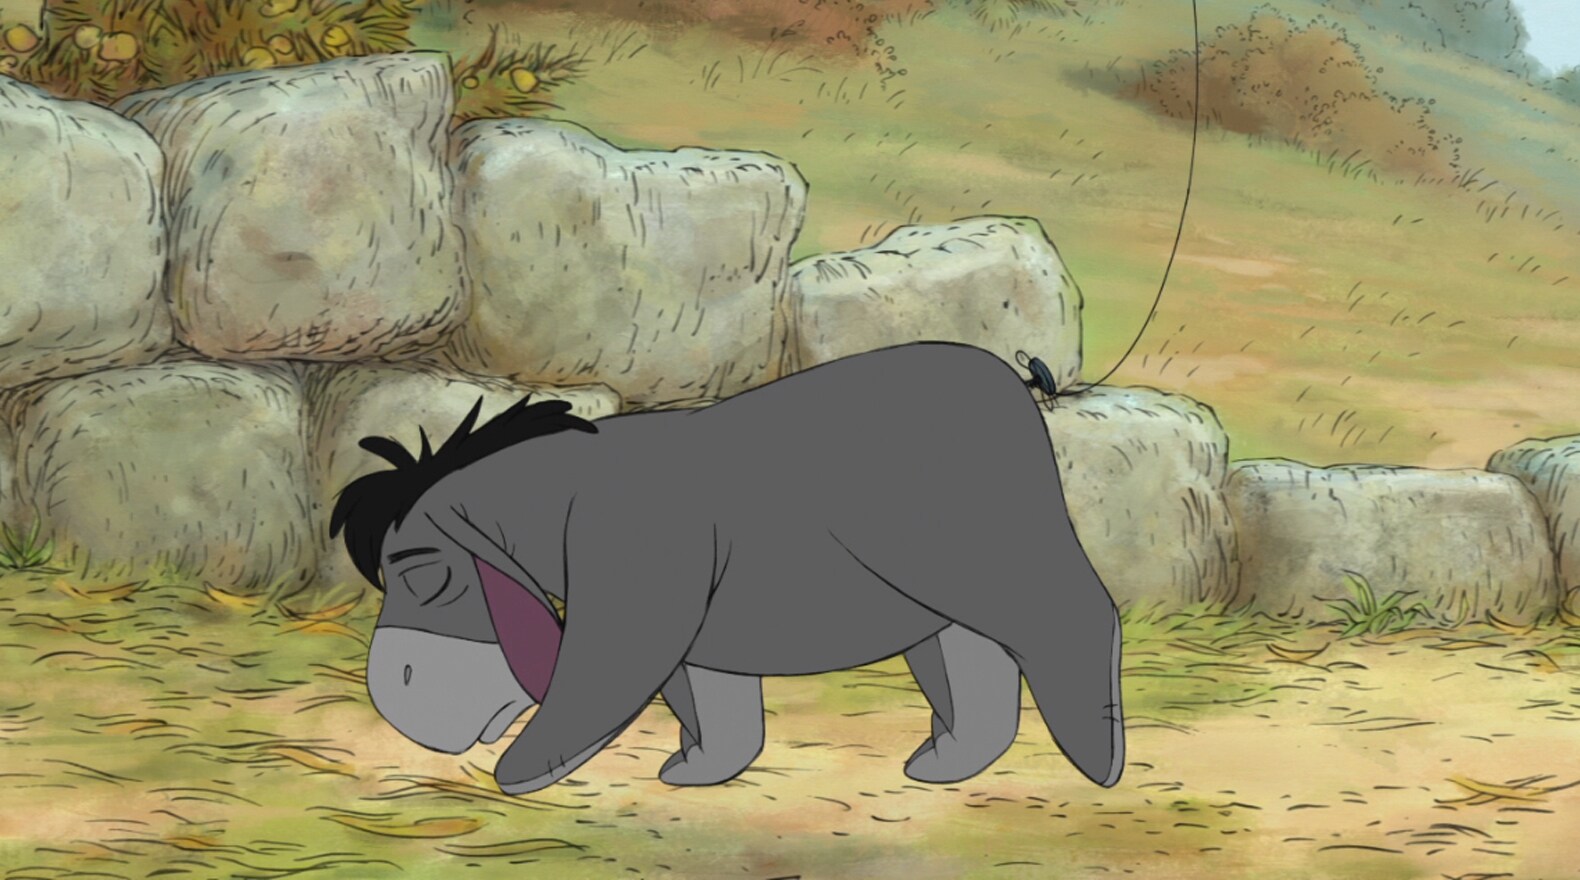 Eeyore feels a bit gloomy without his tail.